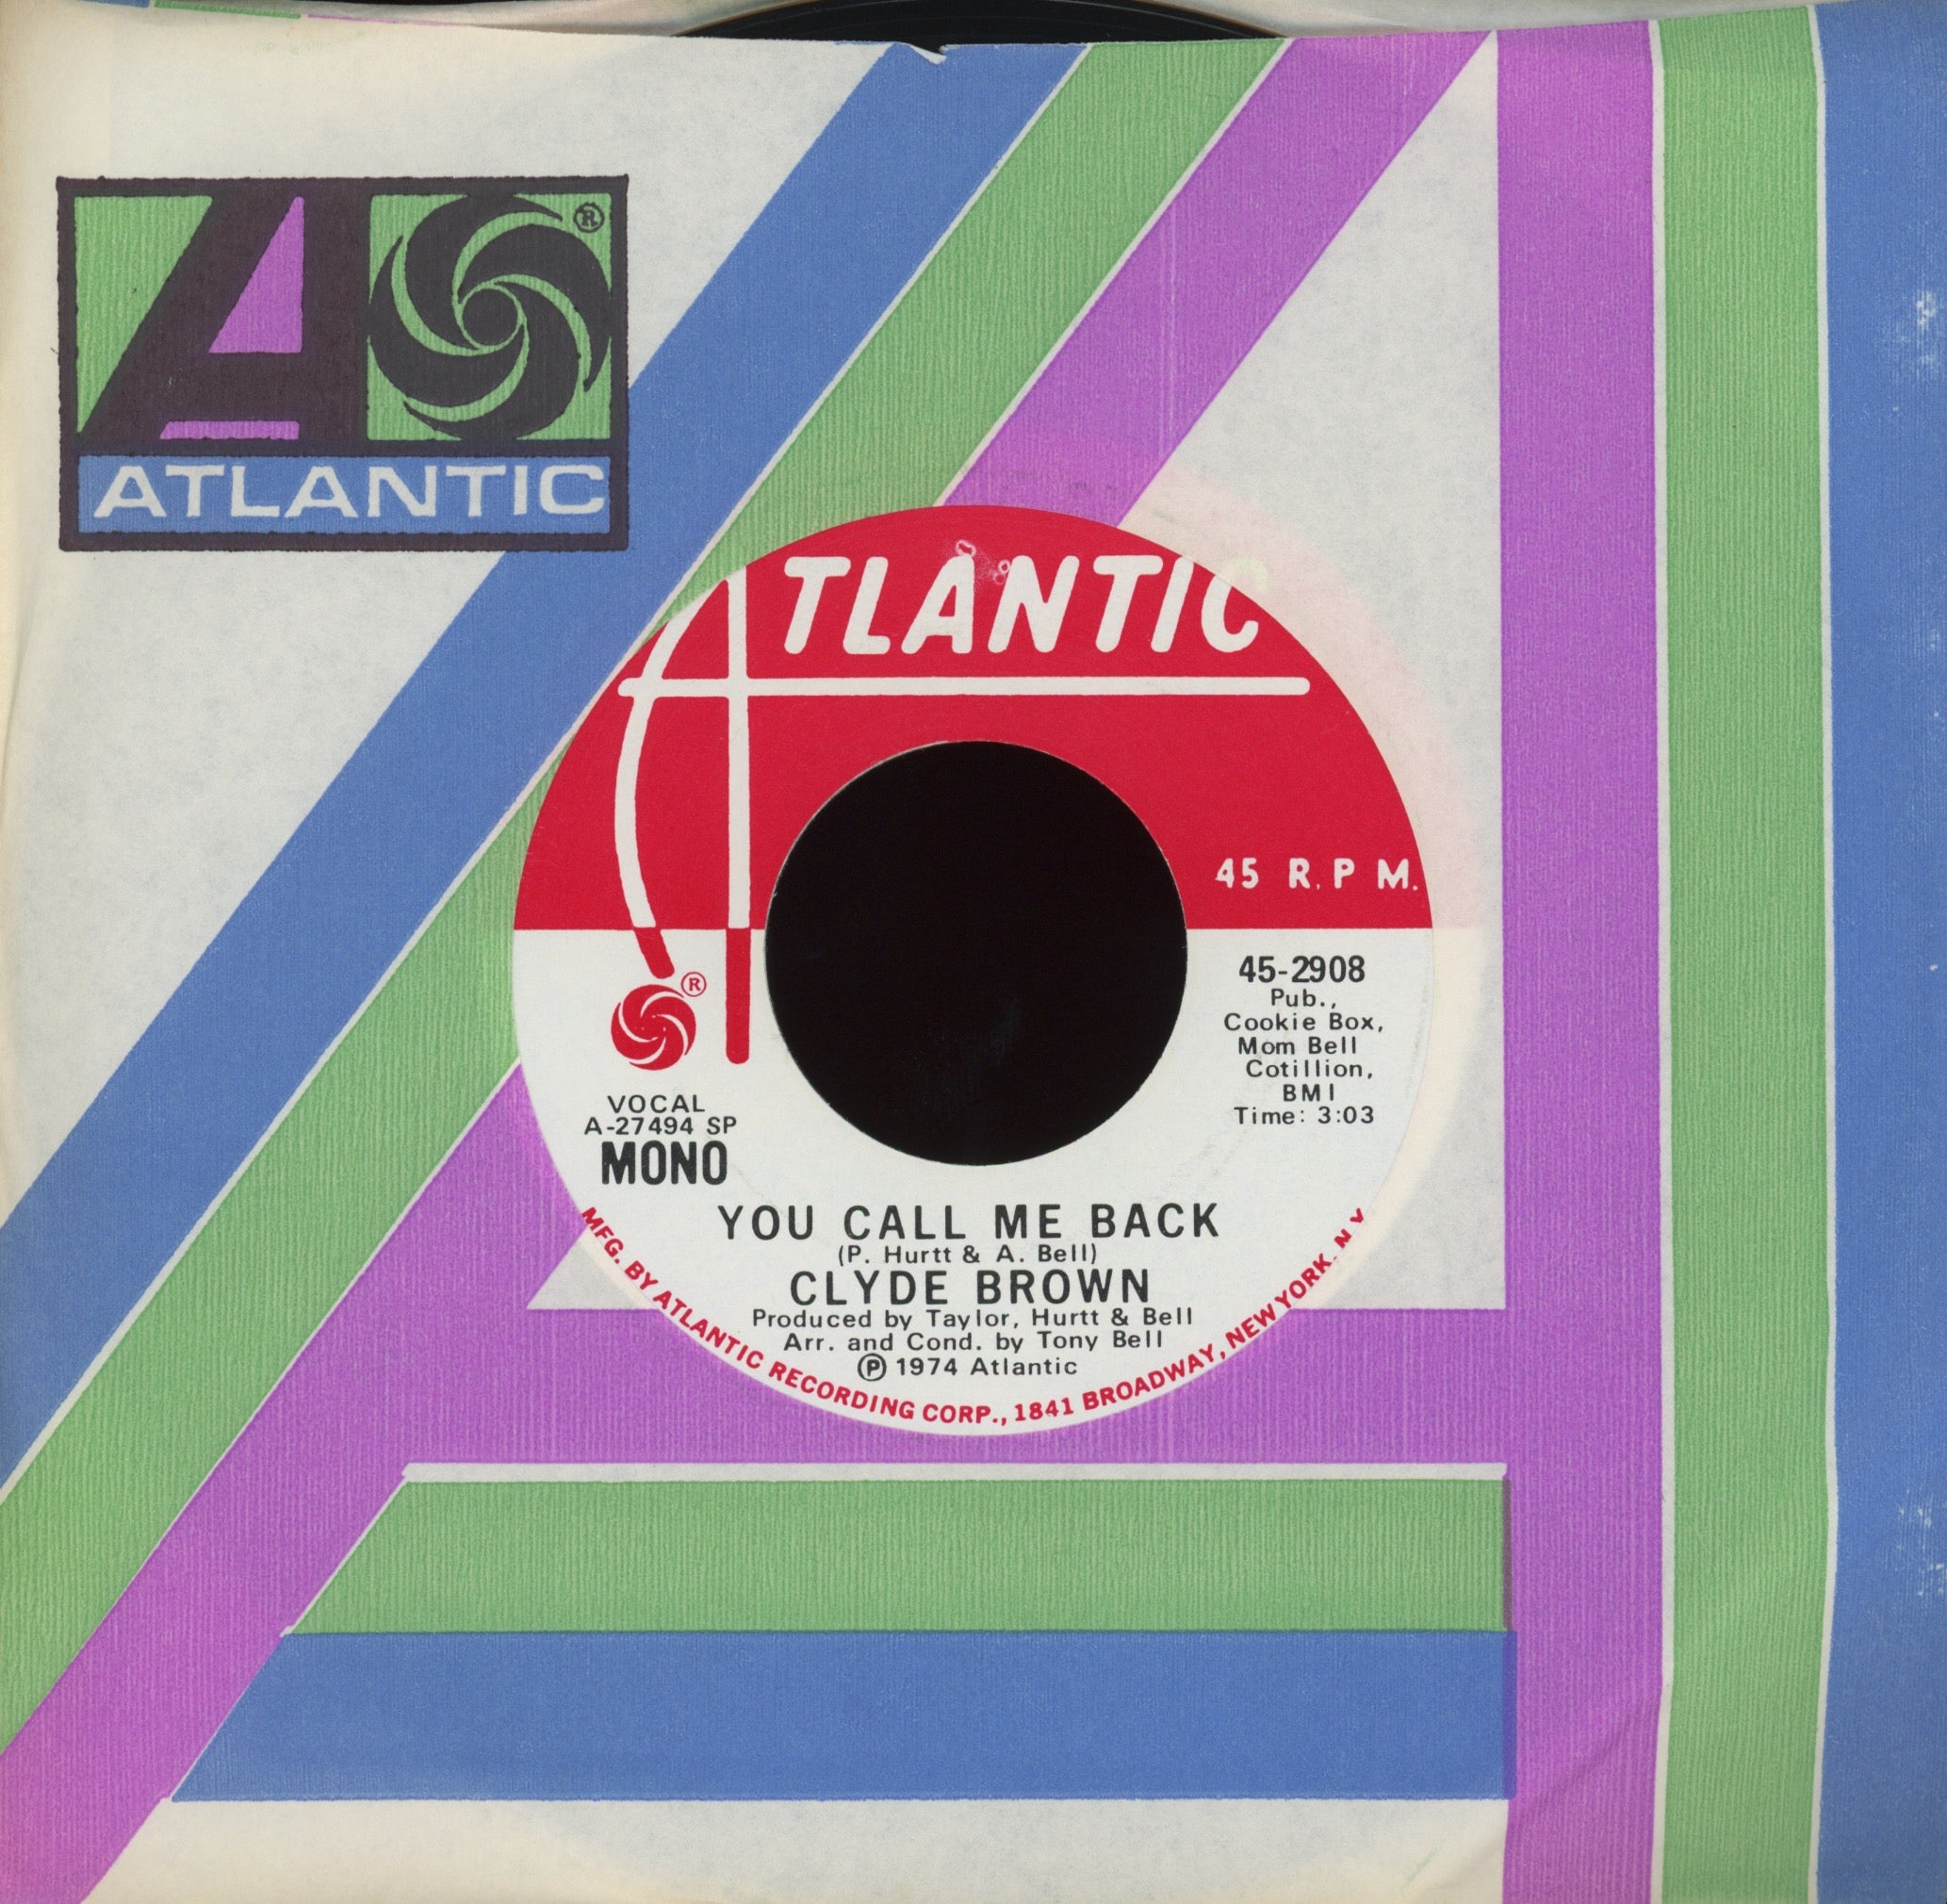 Clyde Brown - You Call Me Back on Atlantic Mono Stereo Promo